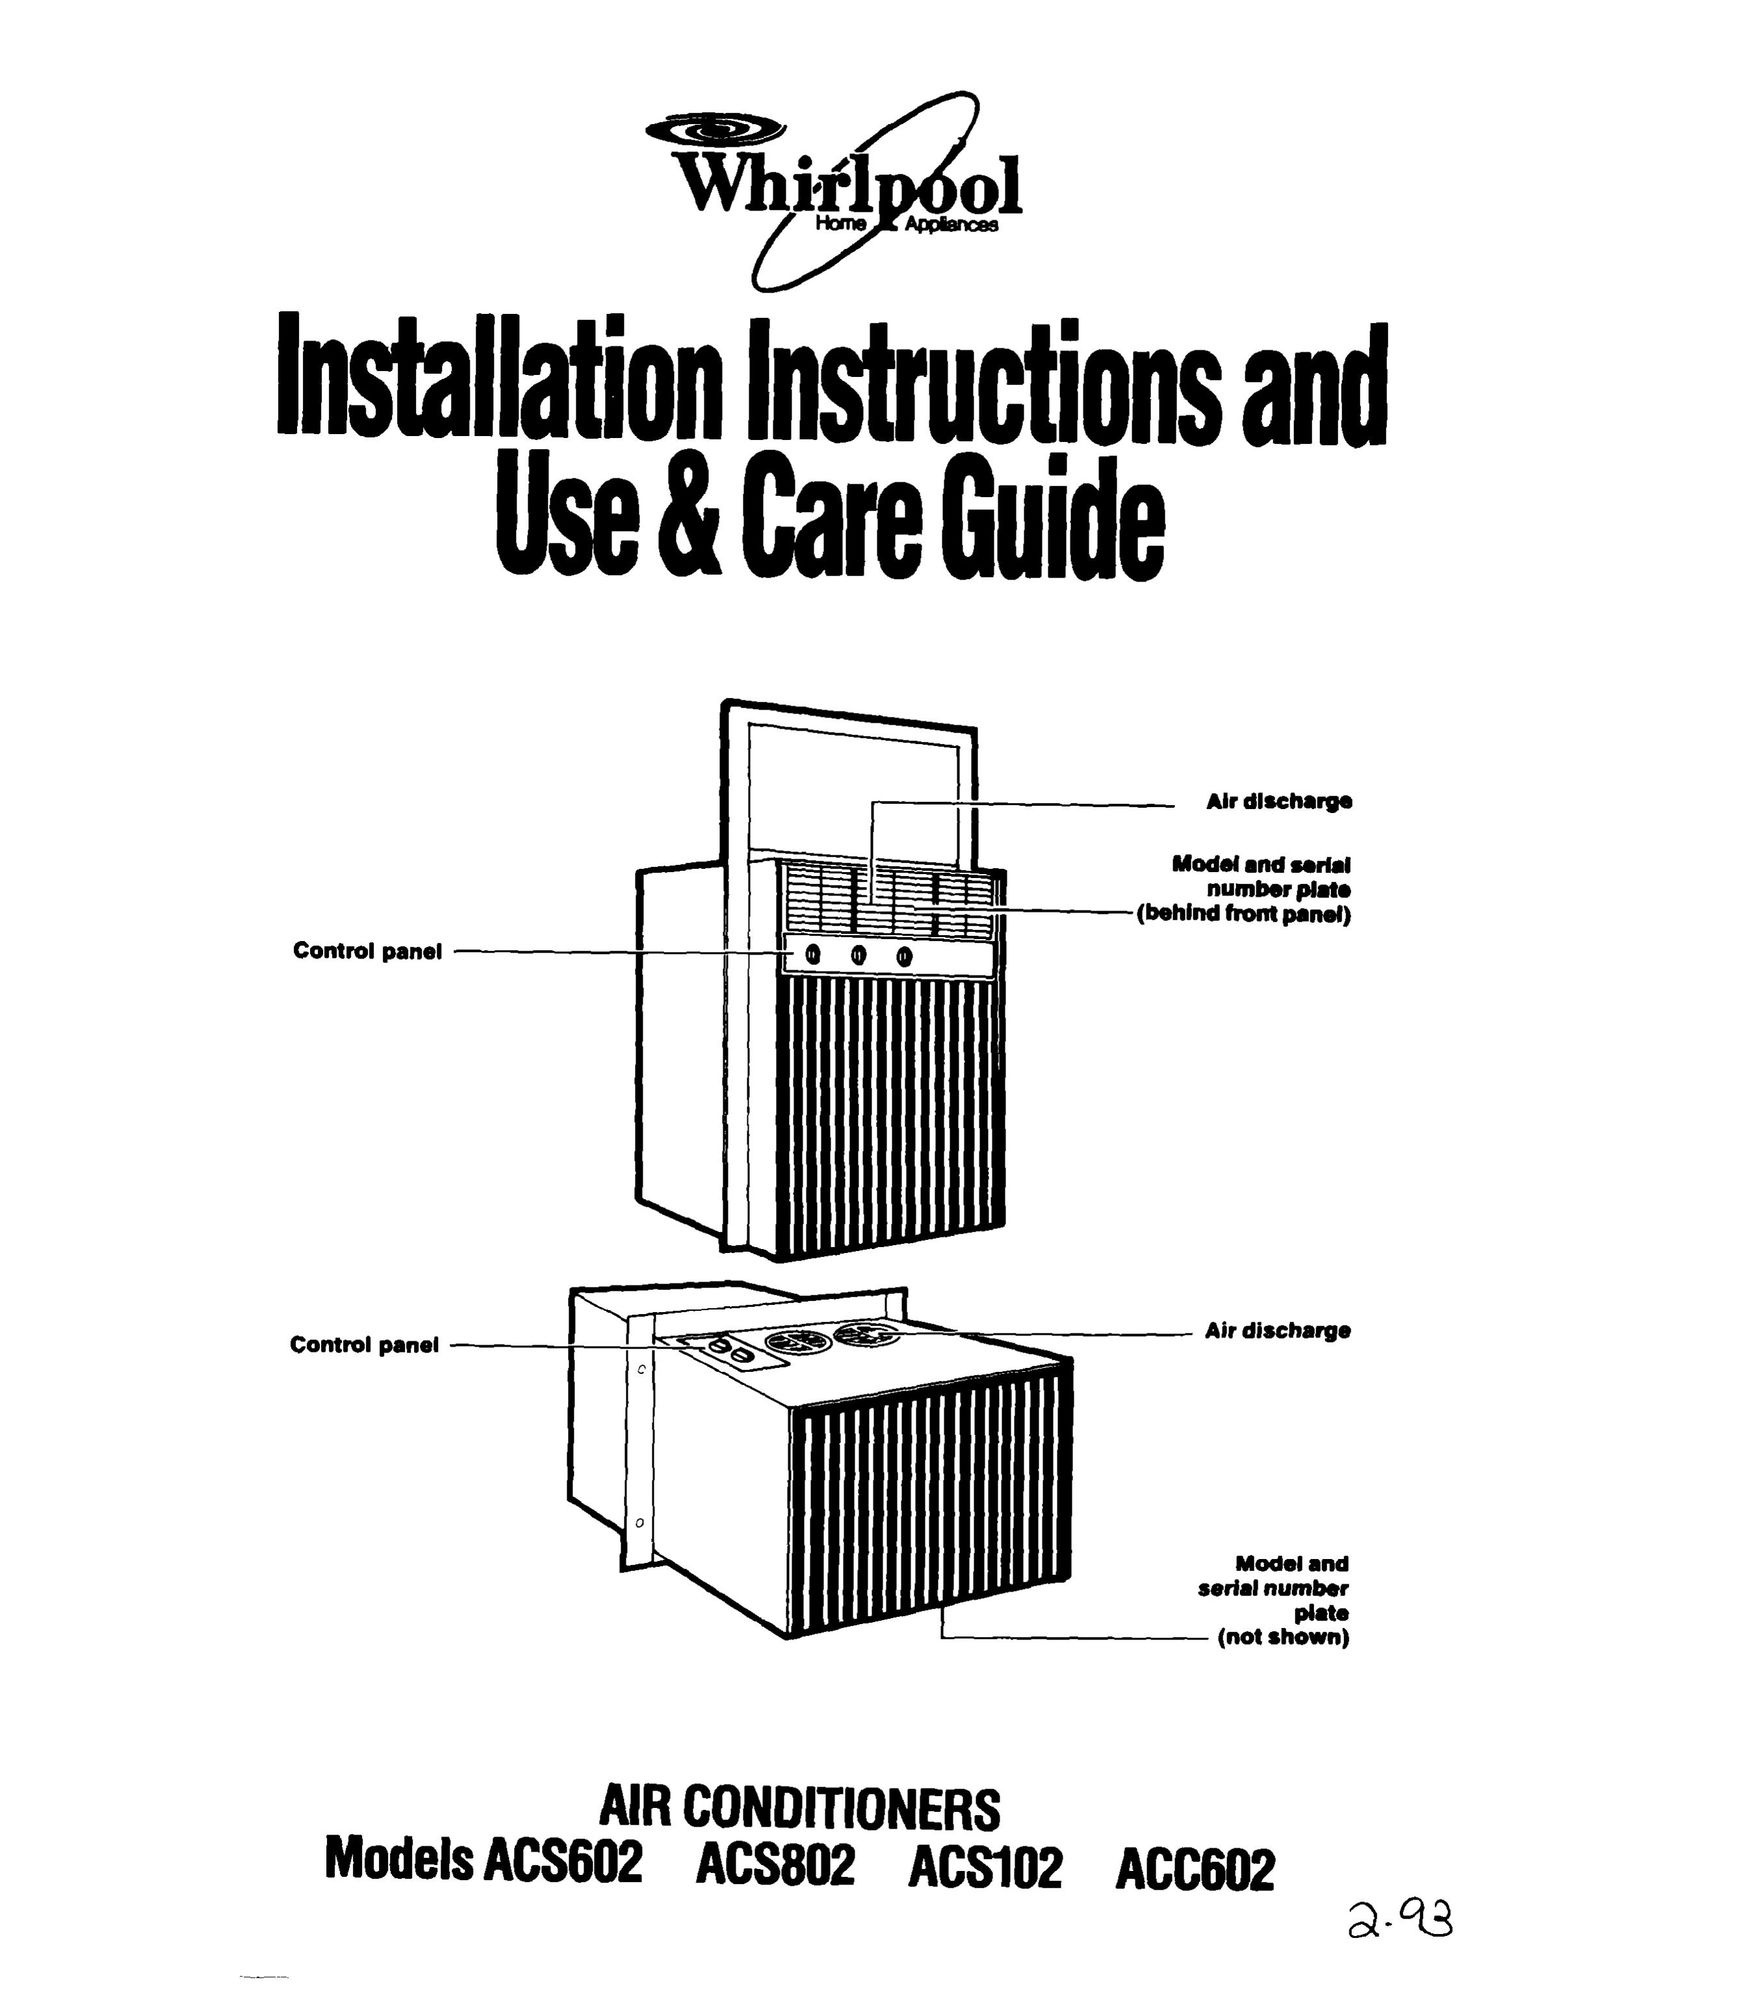 Whirlpool ACC602 Air Conditioner User Manual